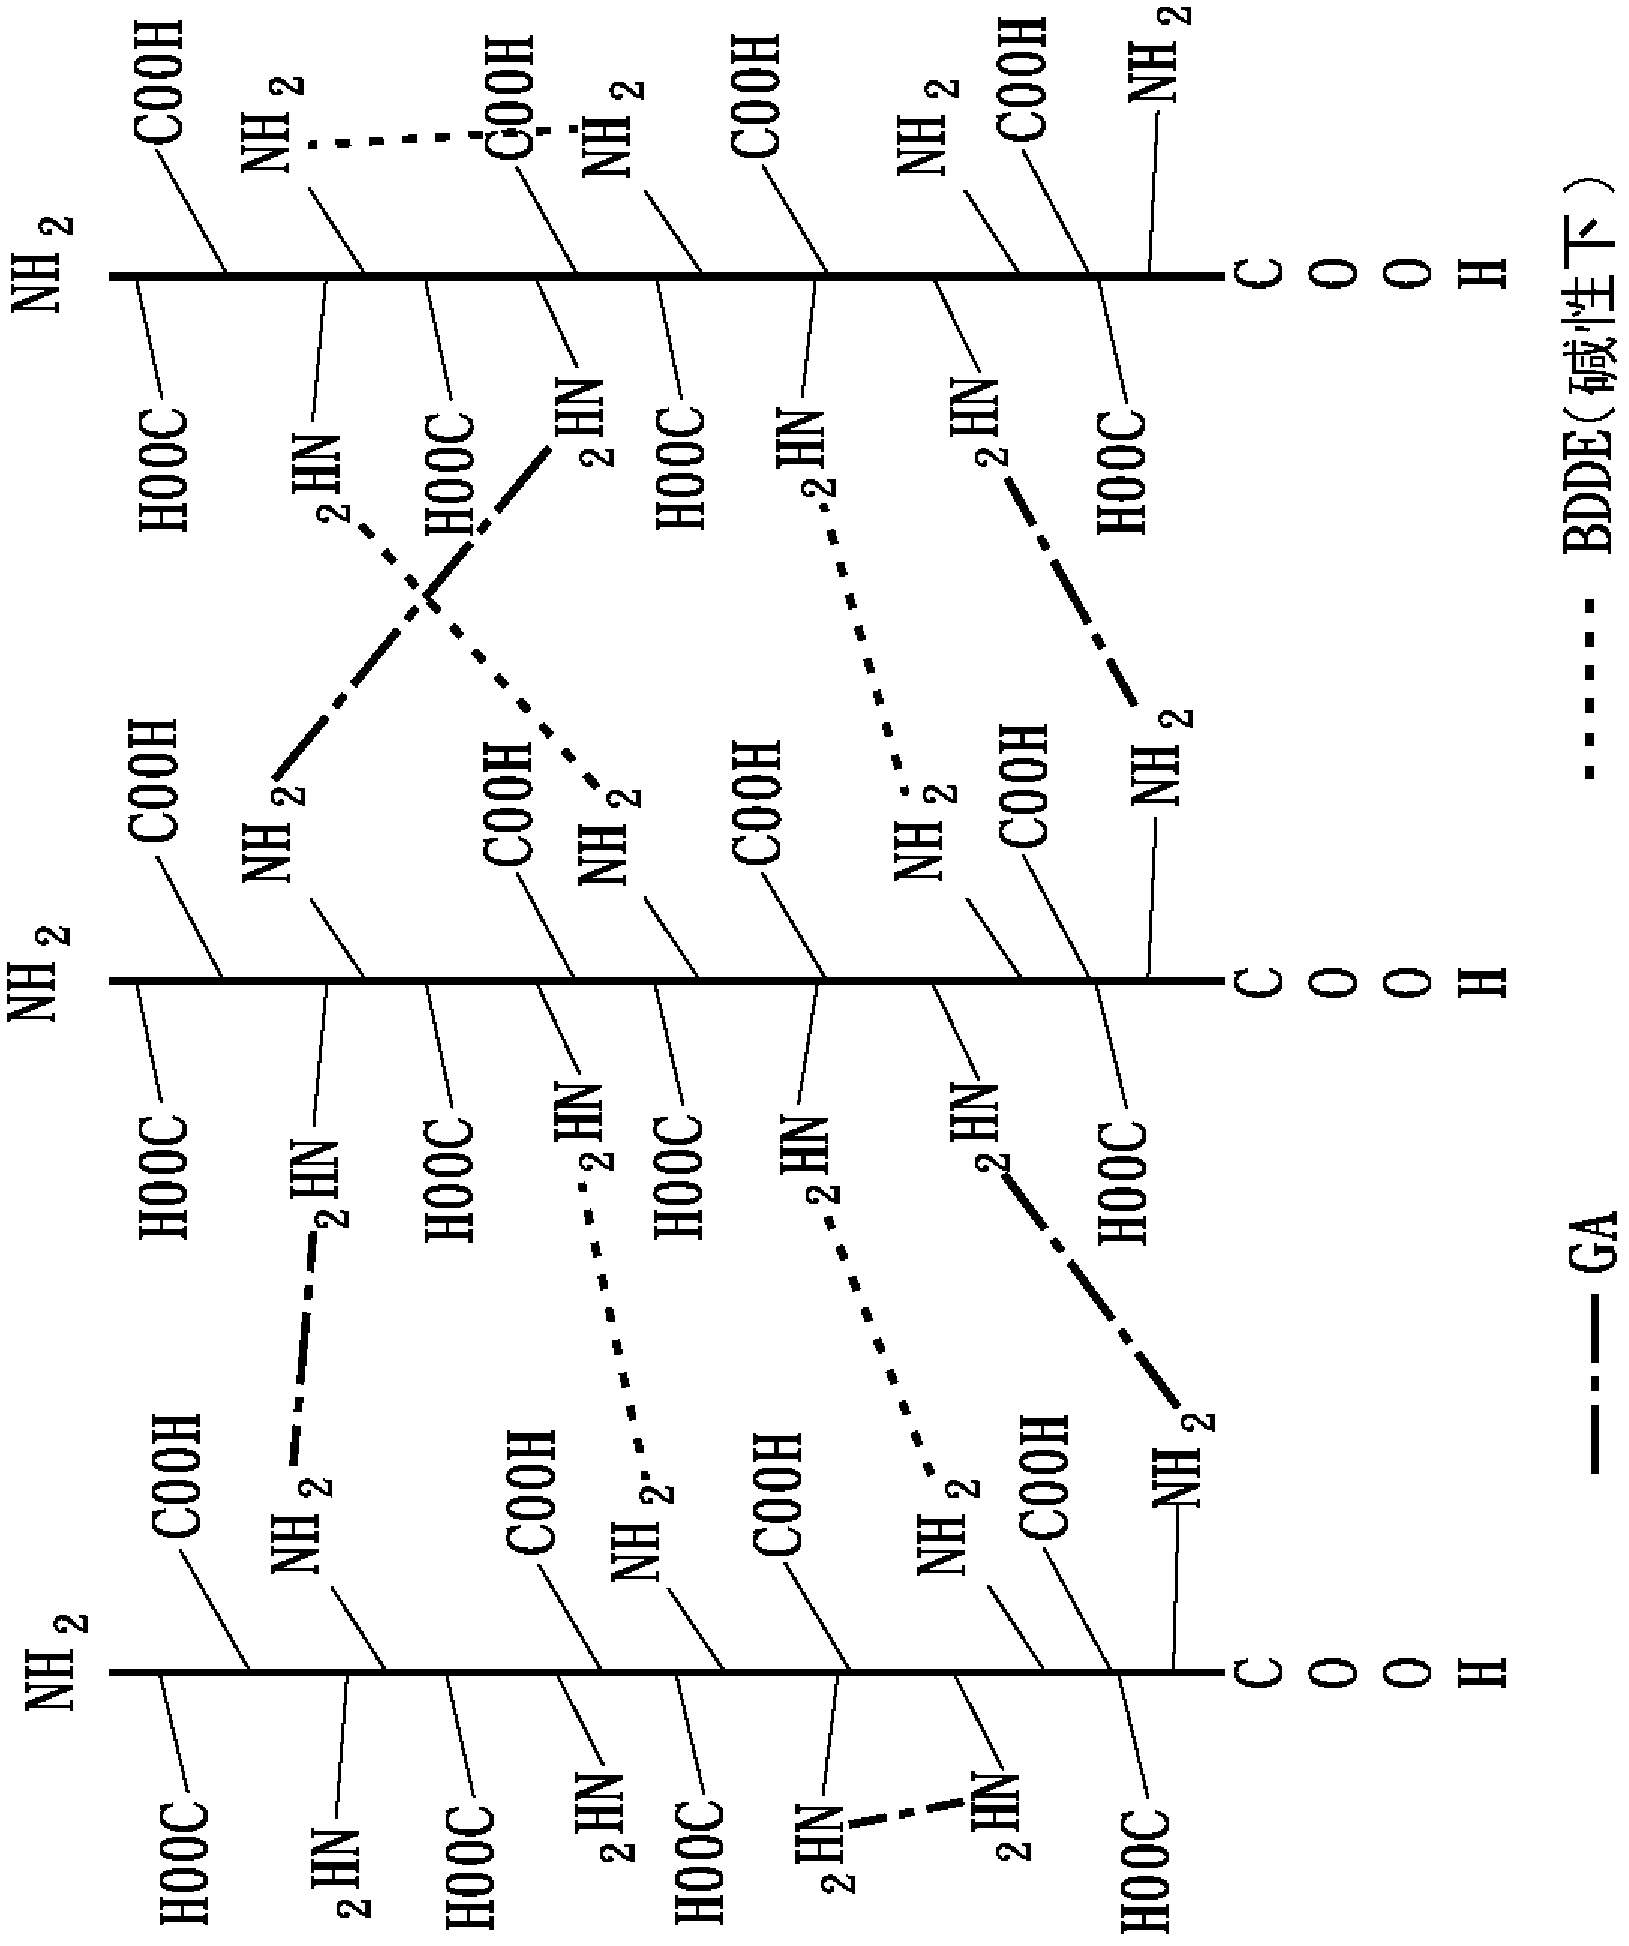 Triple cross-linking collagen, preparation method and uses thereof